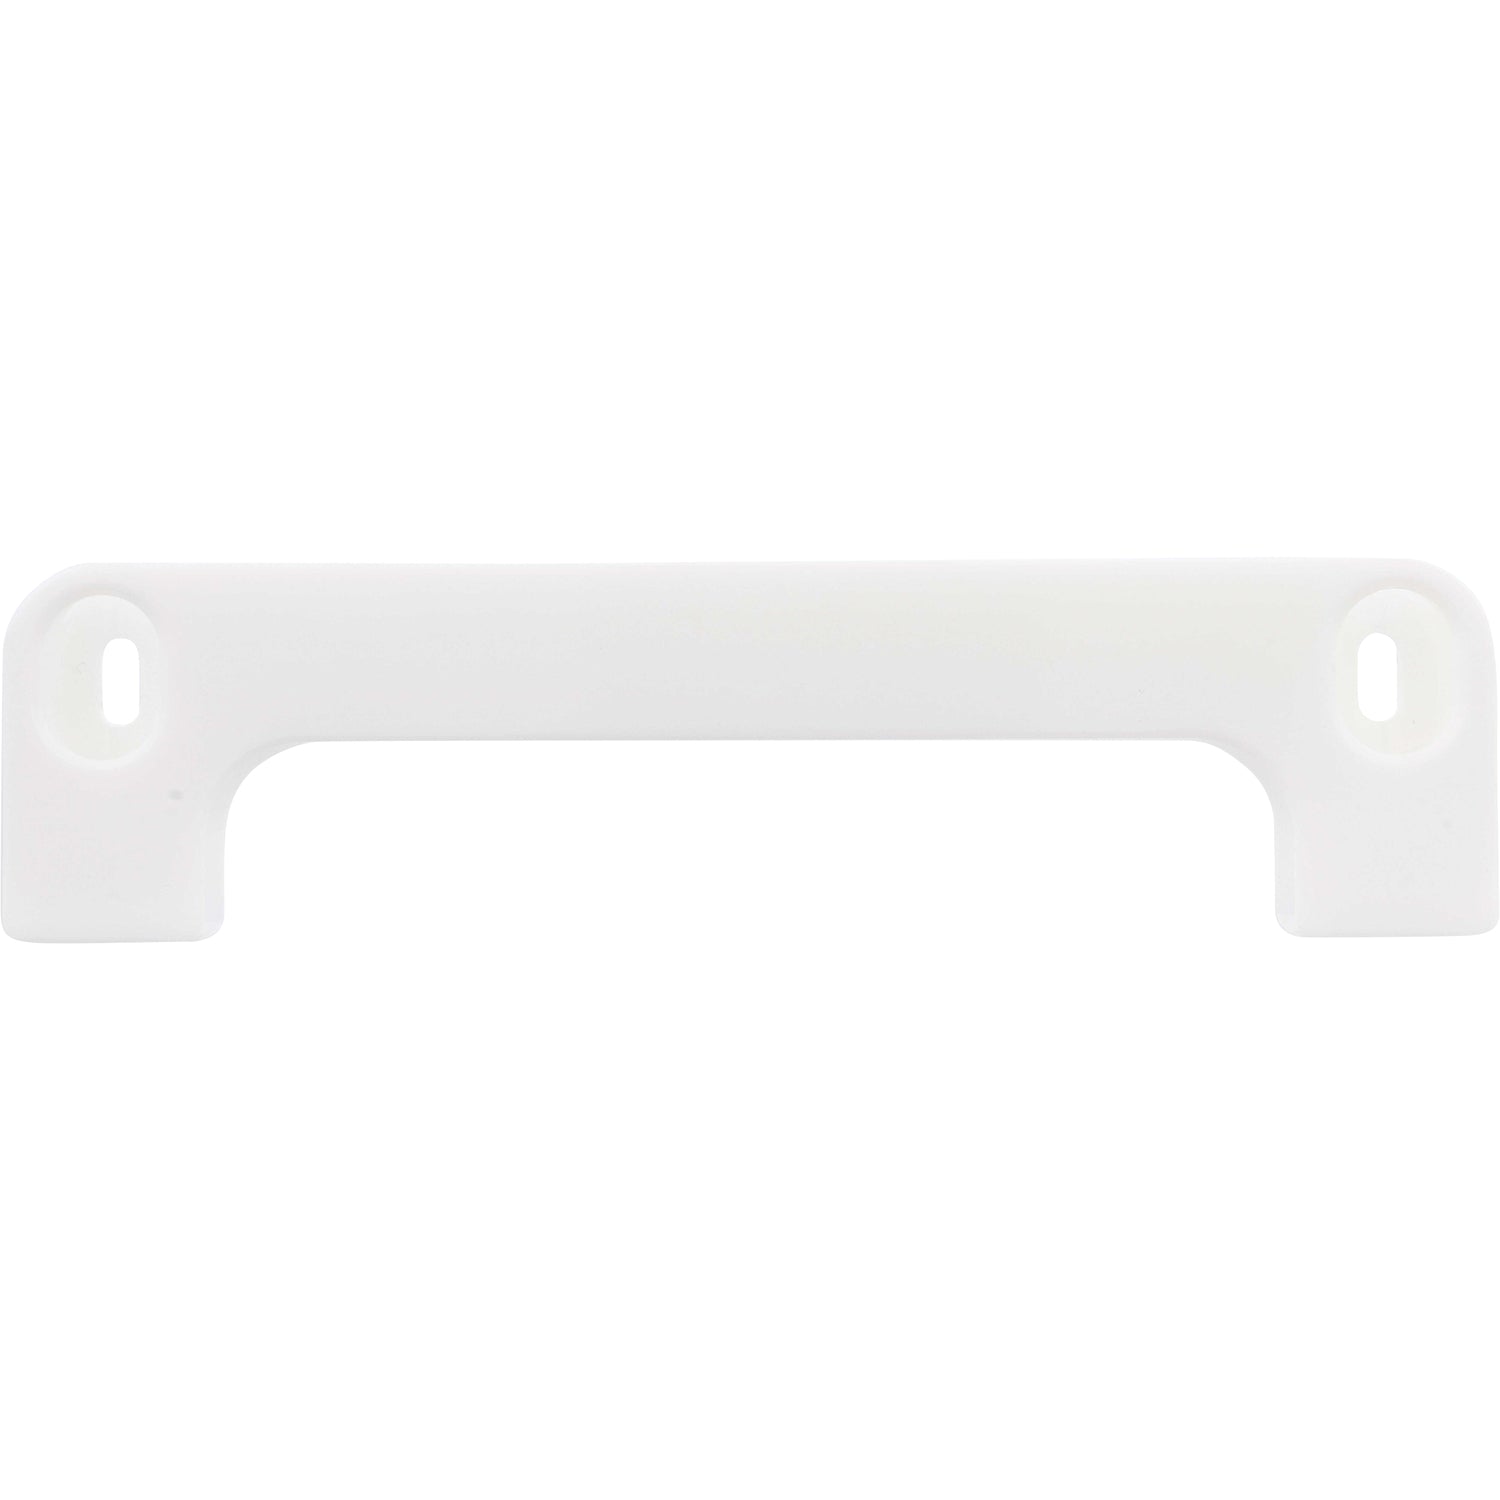 White plastic mounting bracket shaped like a shallow U with two holes used for mounting. Shown on white background.